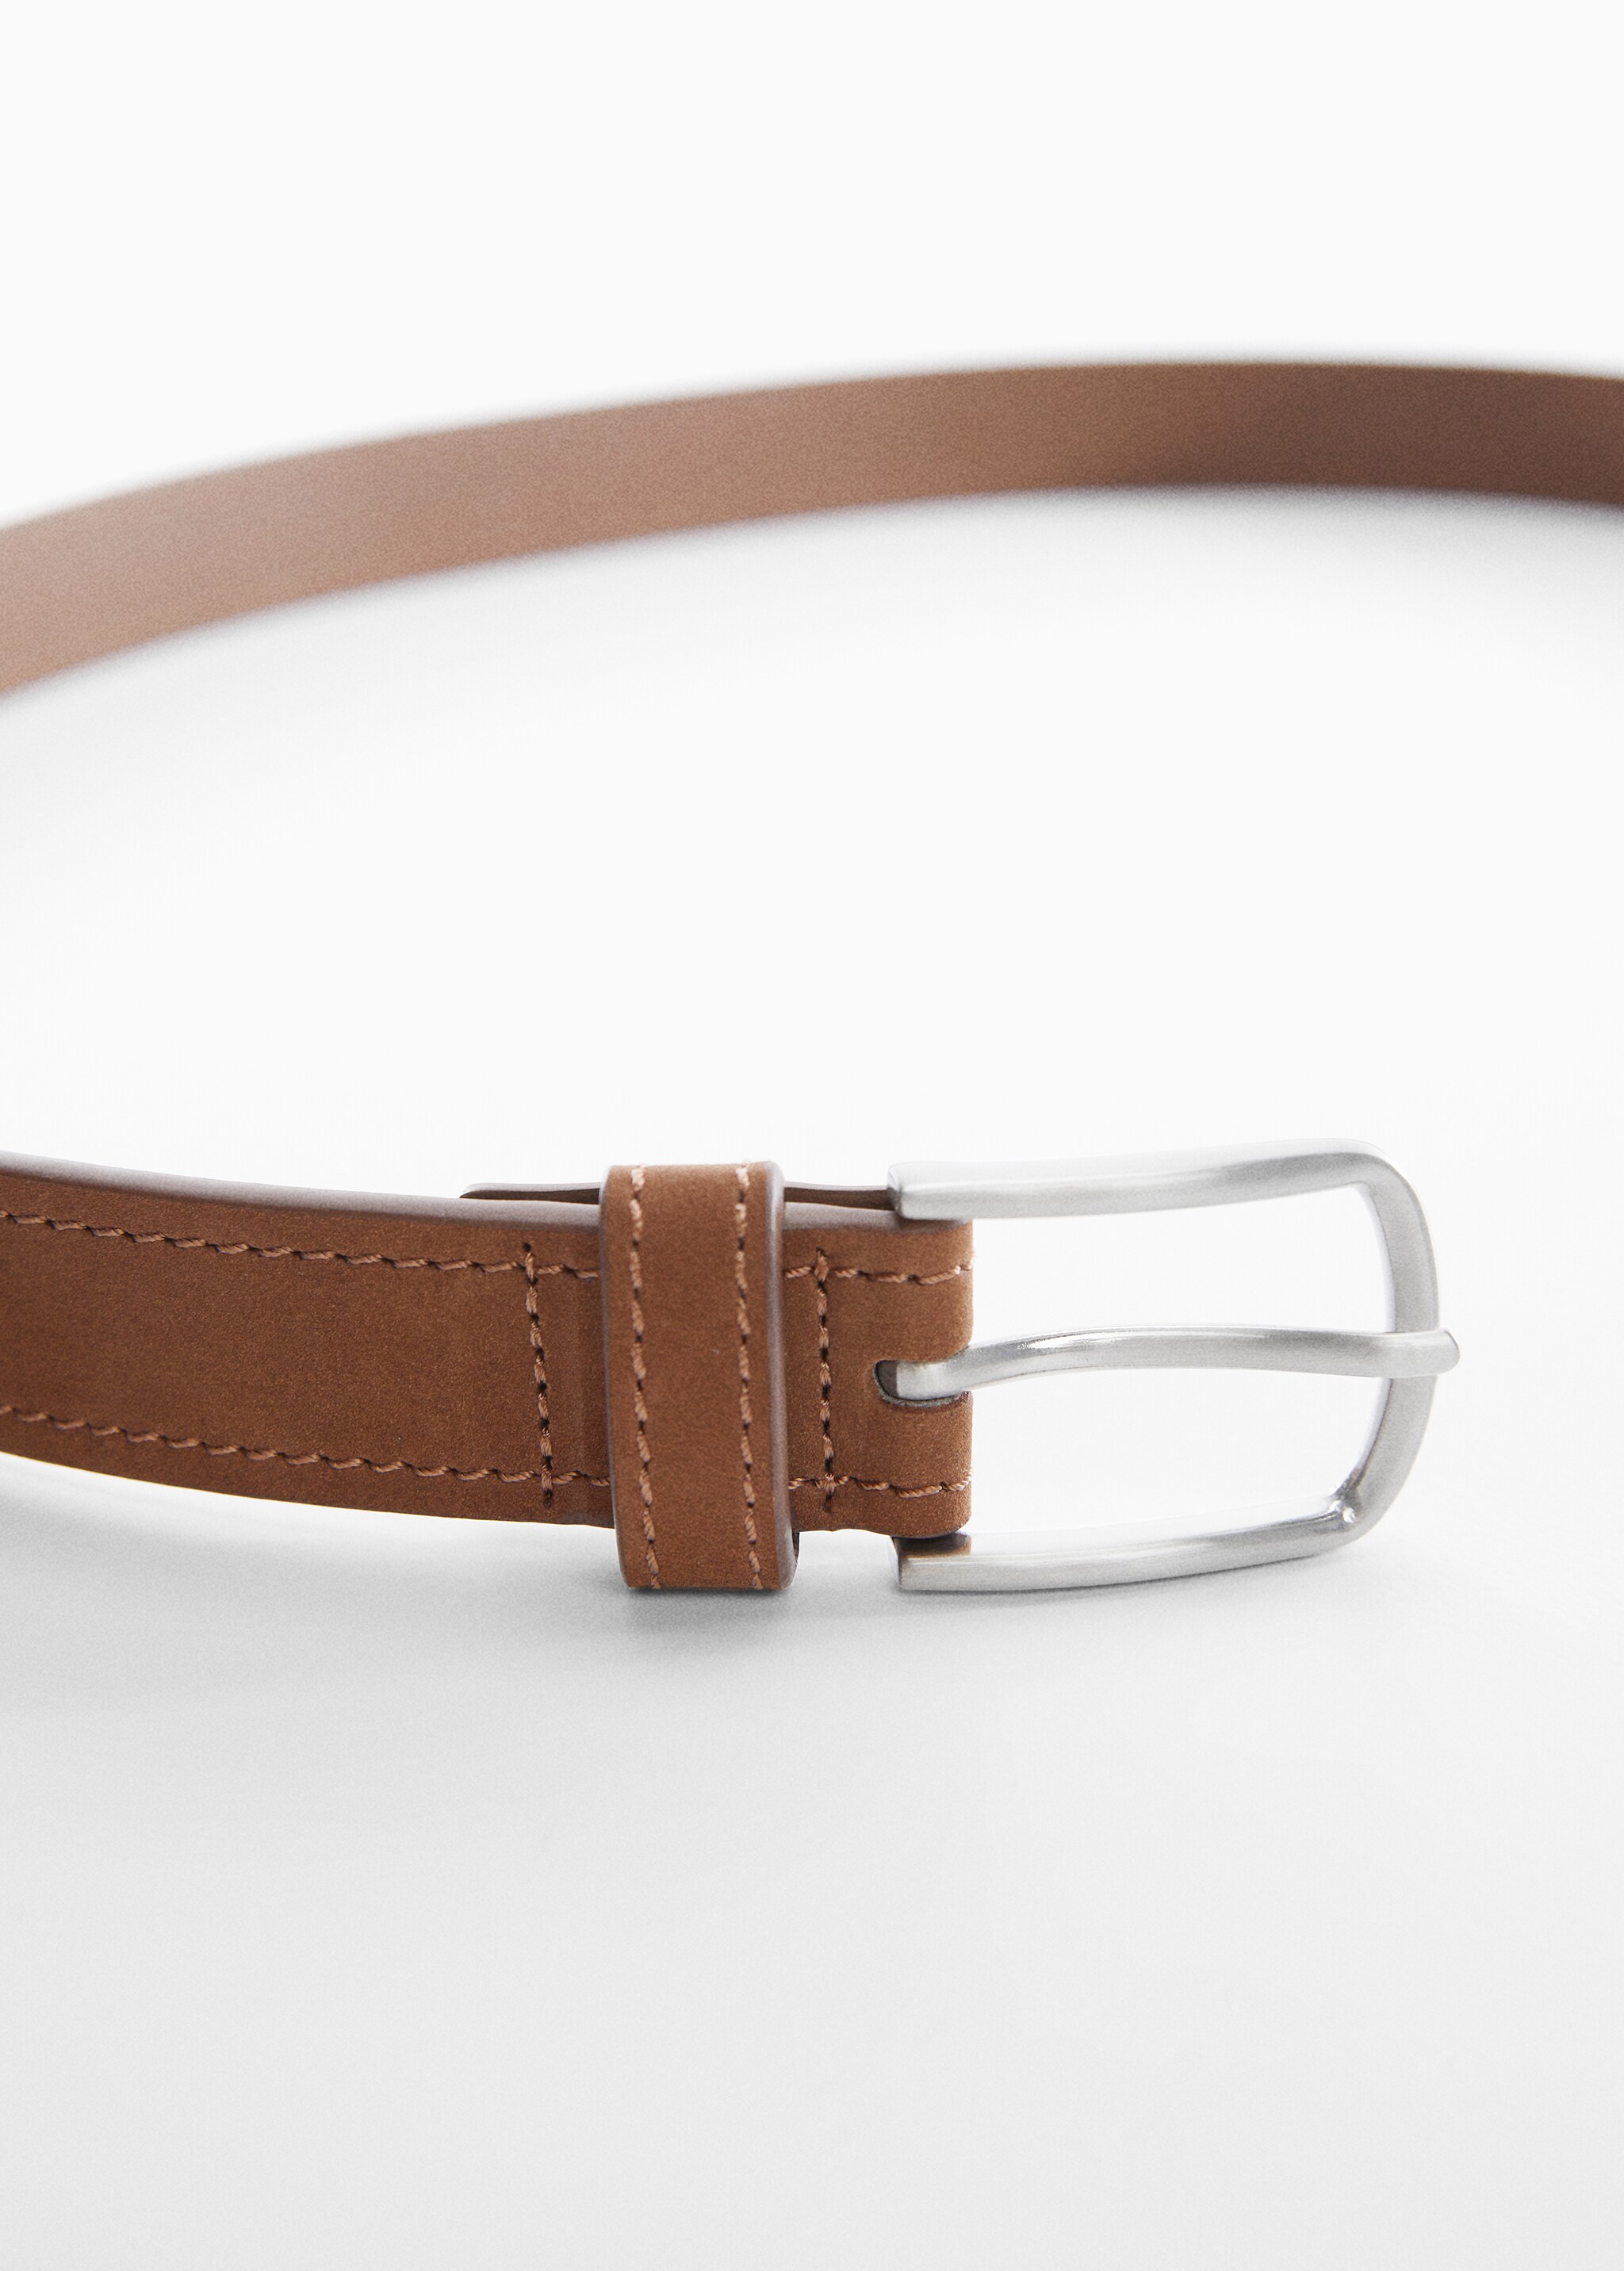 Suede leather belt - Details of the article 1